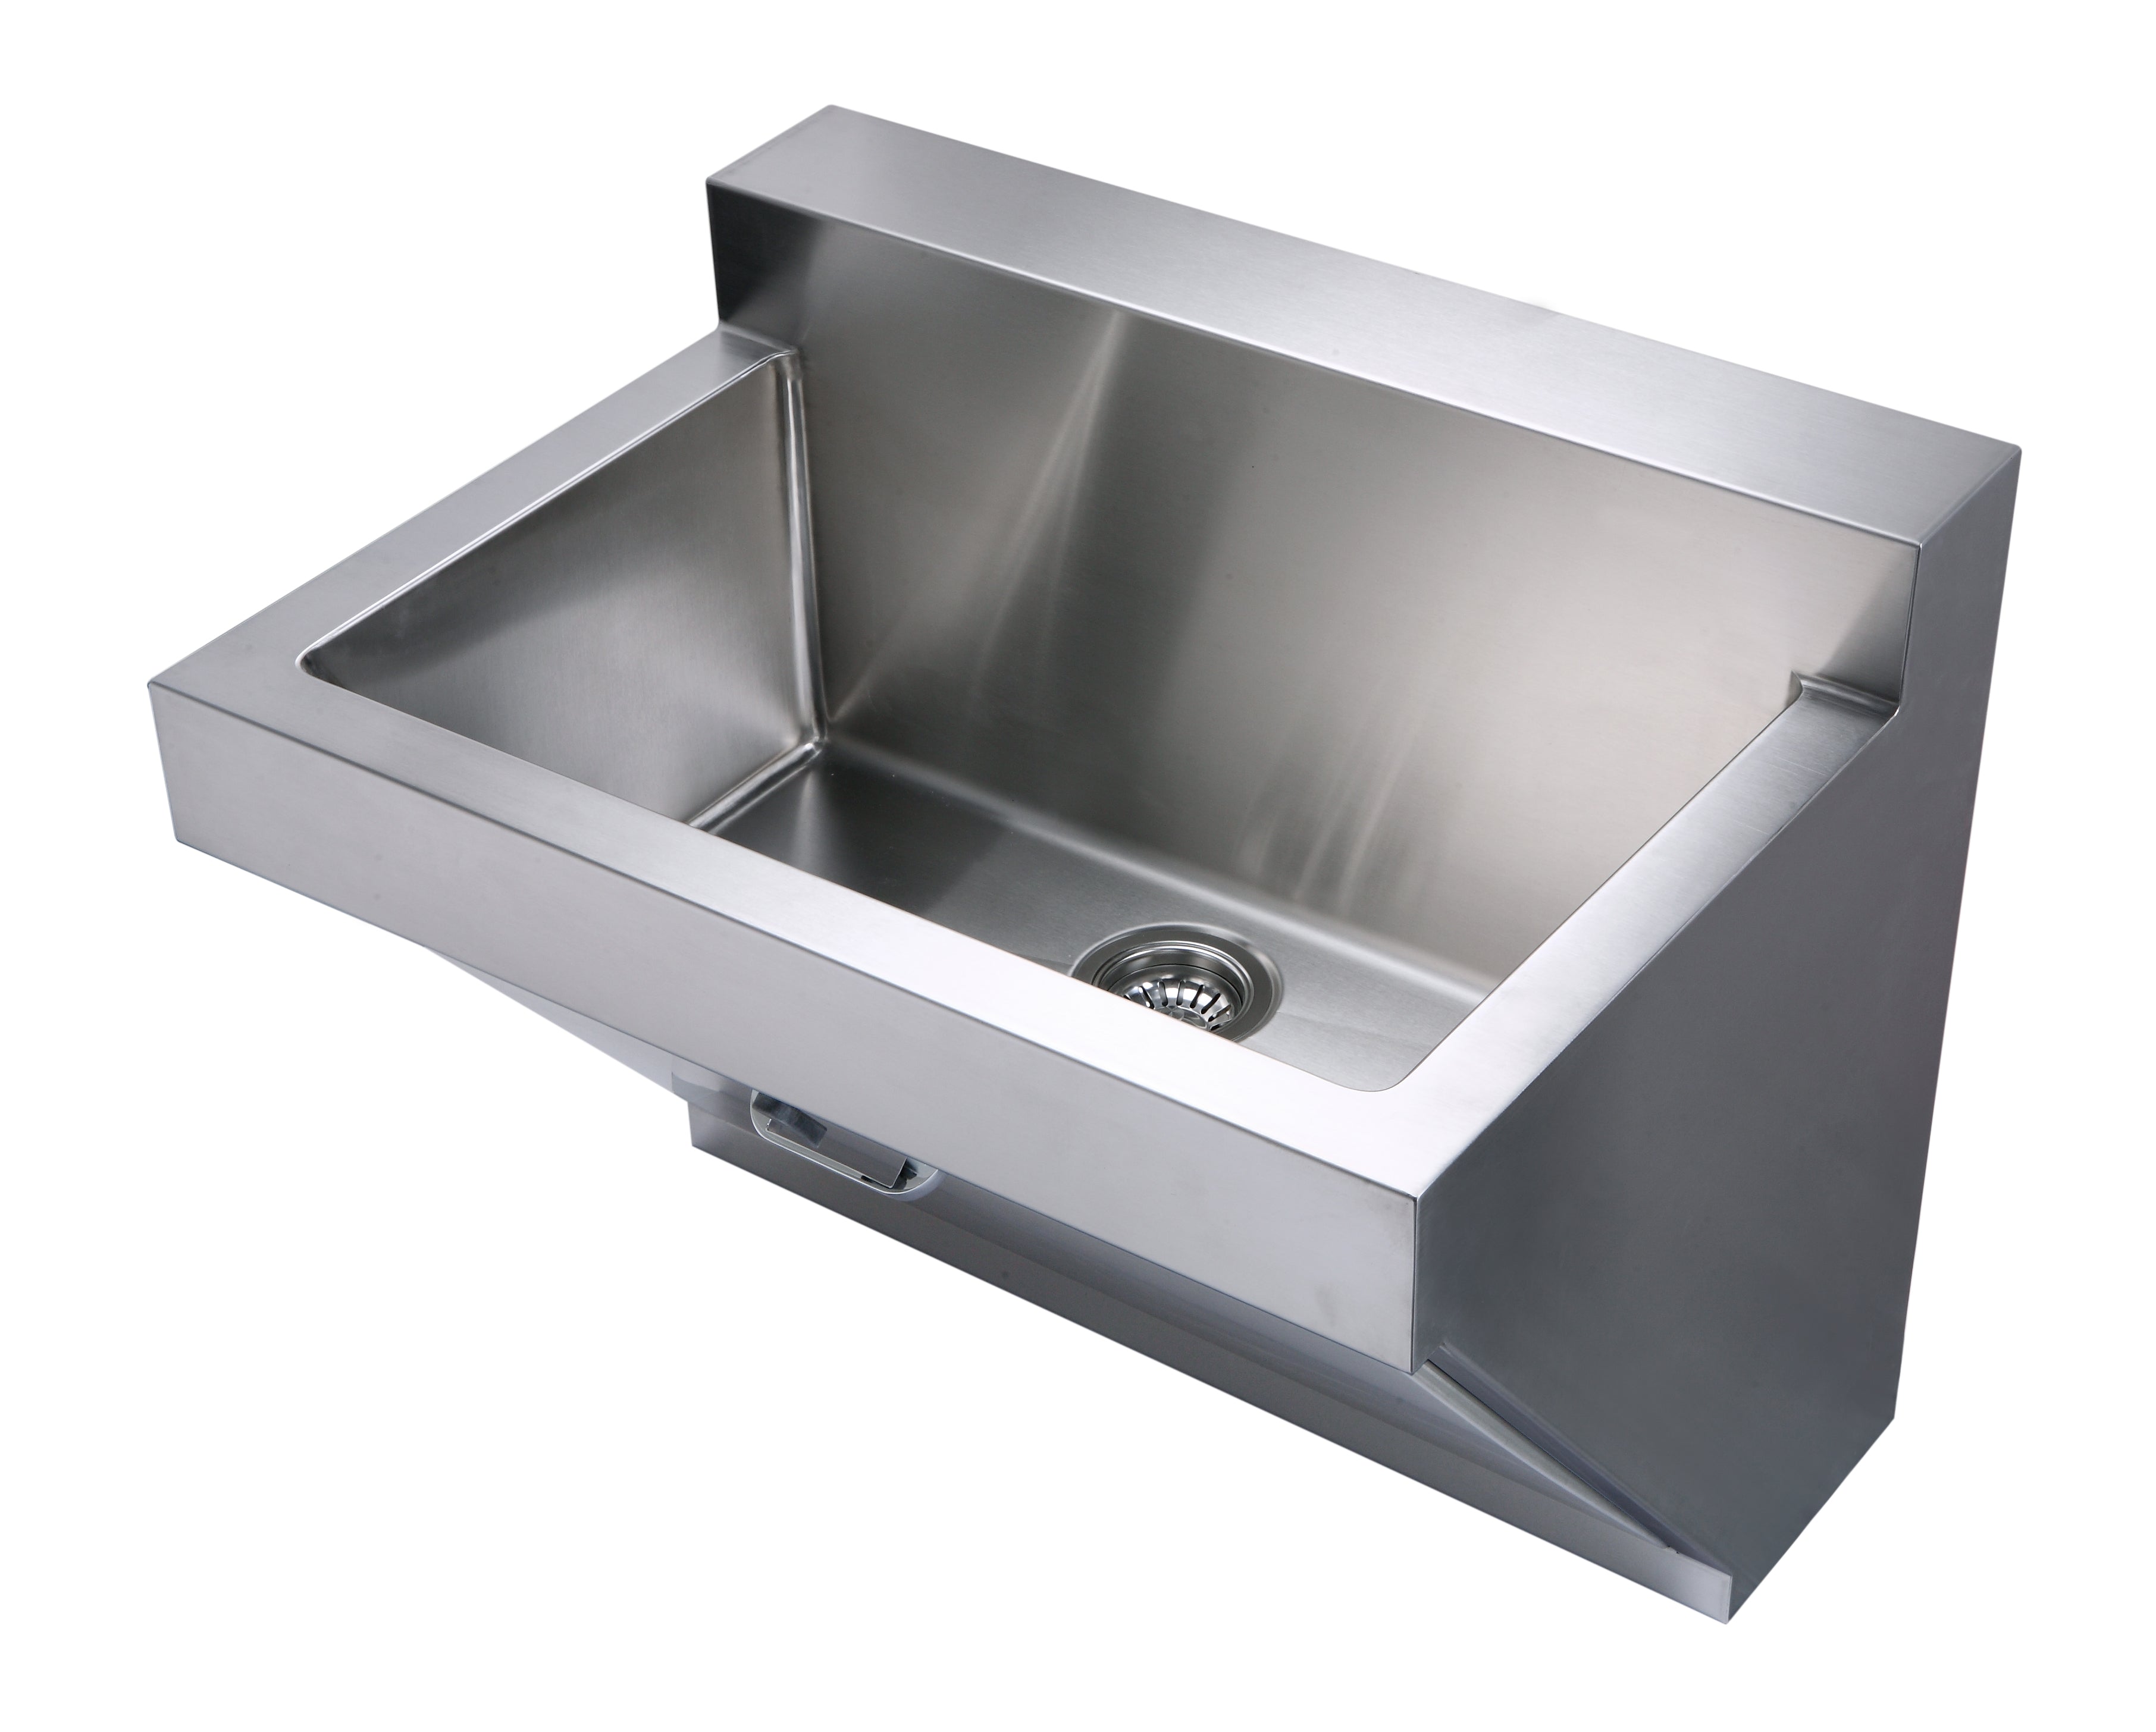 Whitehaus Noah's Collection Stainless Steel Single Bowl Utility Sink